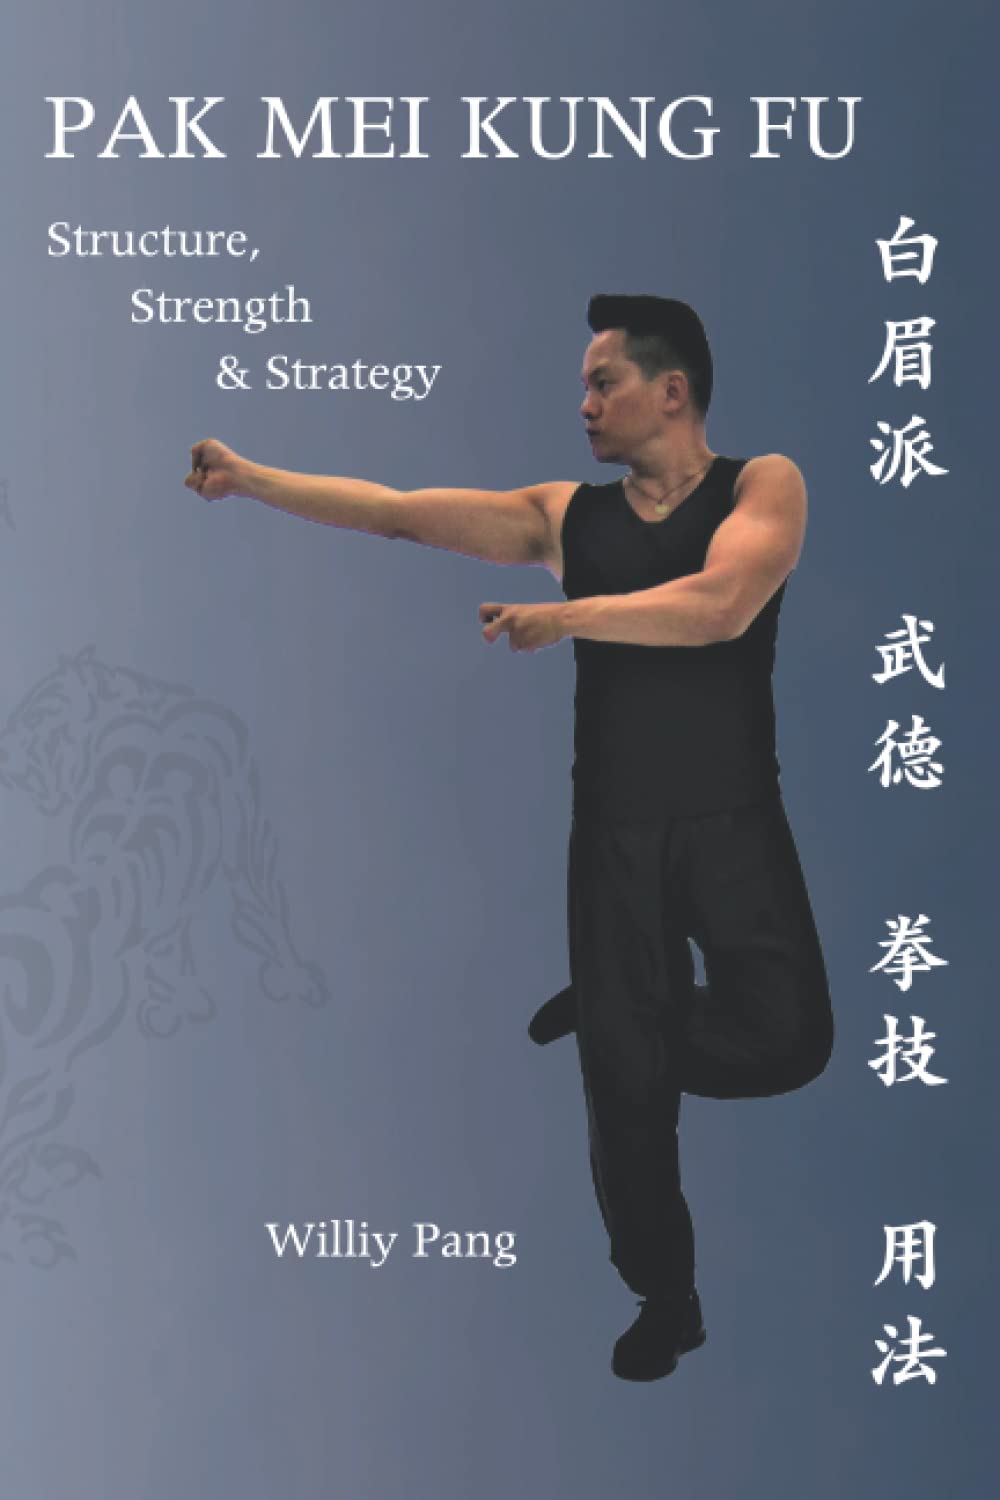 Pak Mei Kung Fu: Structure, Strength & Strategy Book by Willy Pang